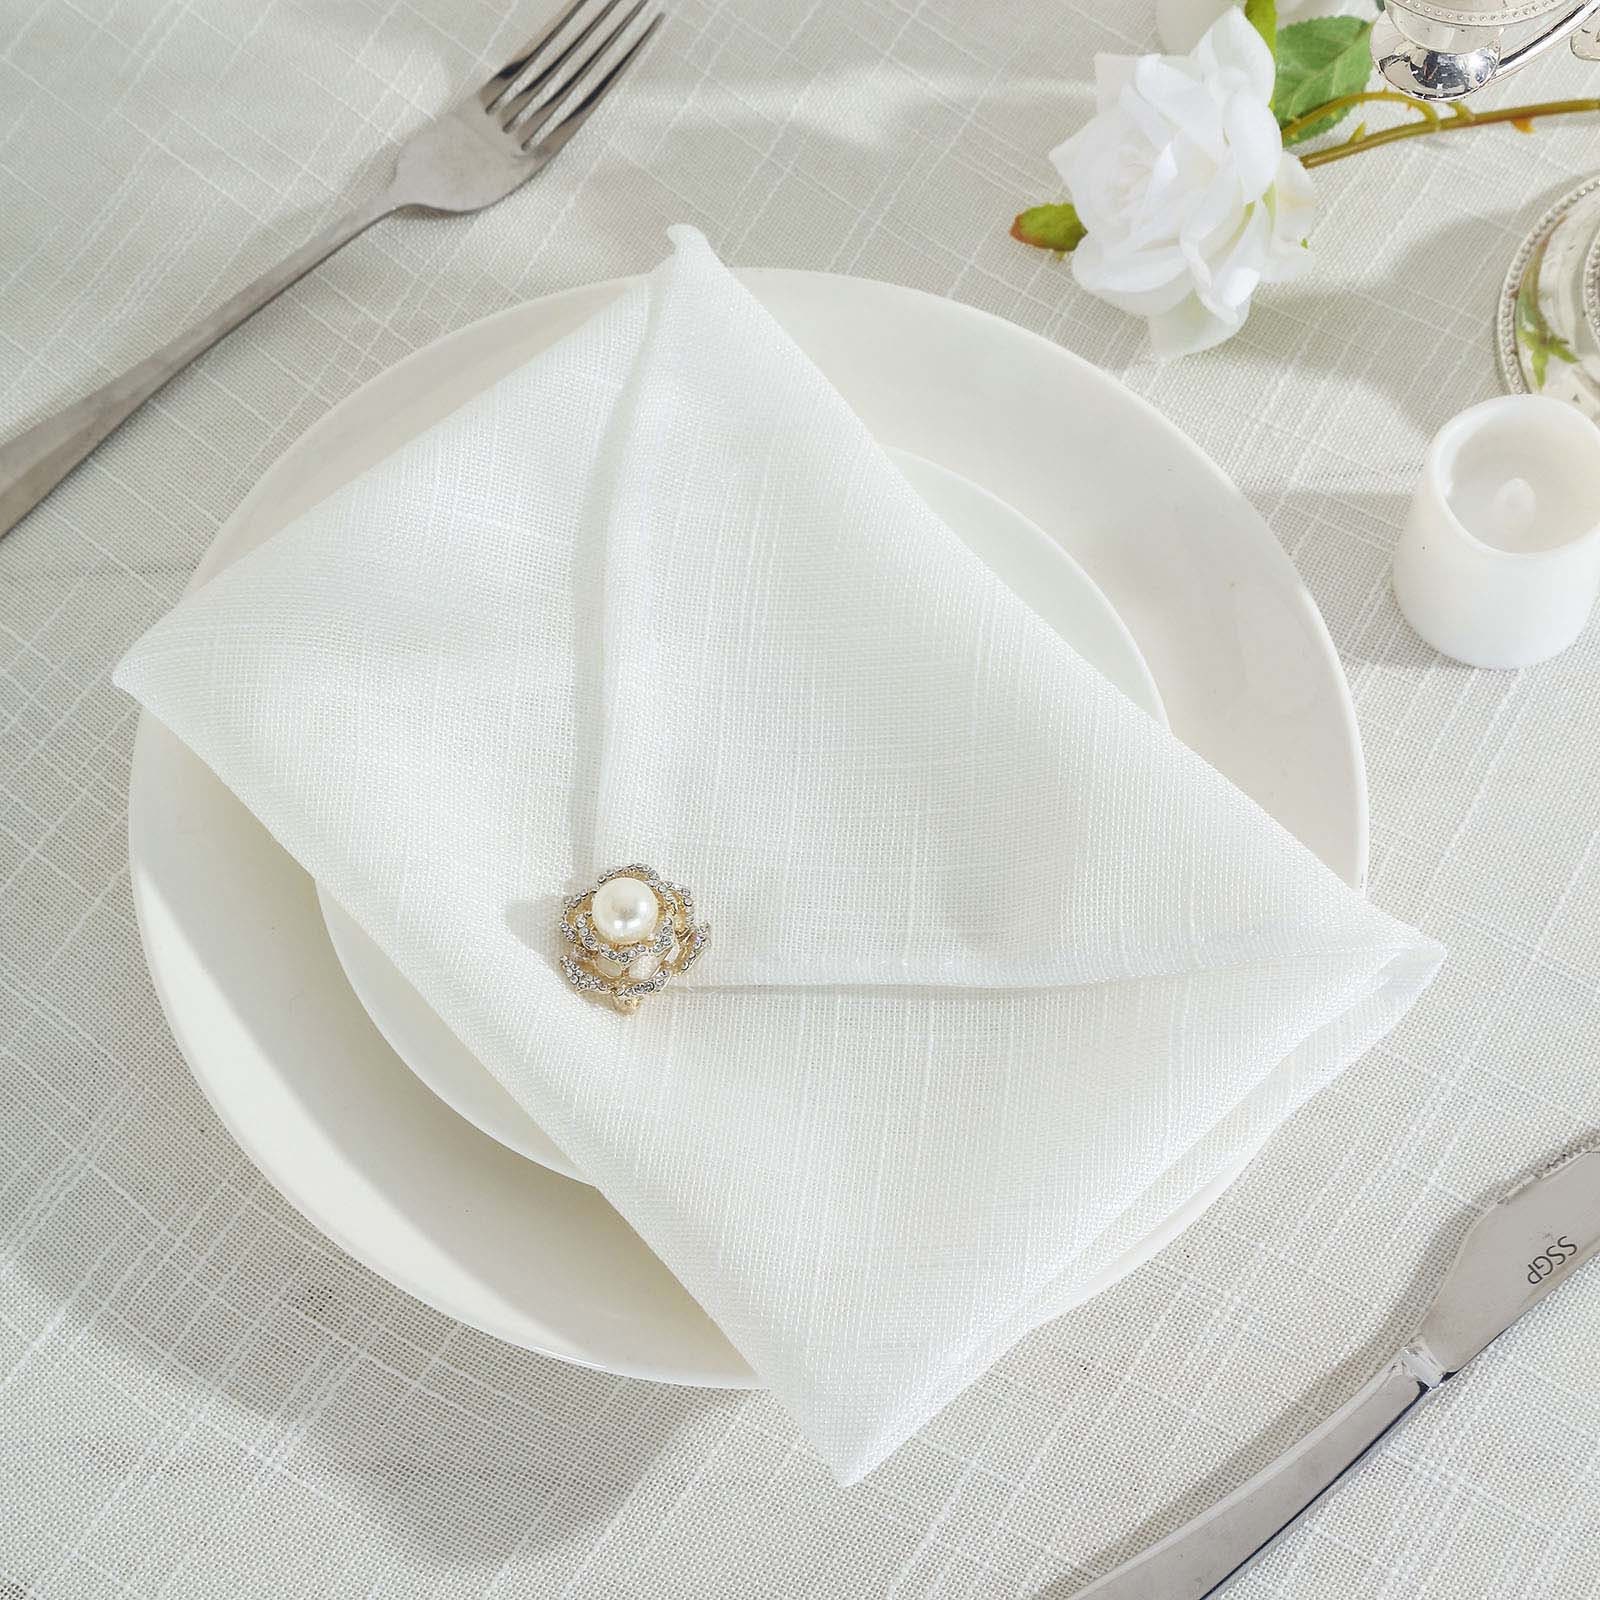 Faux Linen Napkins Set of 4, Wrinkle Free Washable Soft Fabric Textured  Cloth Napkins for Dining, Dinner, Party, Wedding, Holiday (4 Pack, 20 x 20